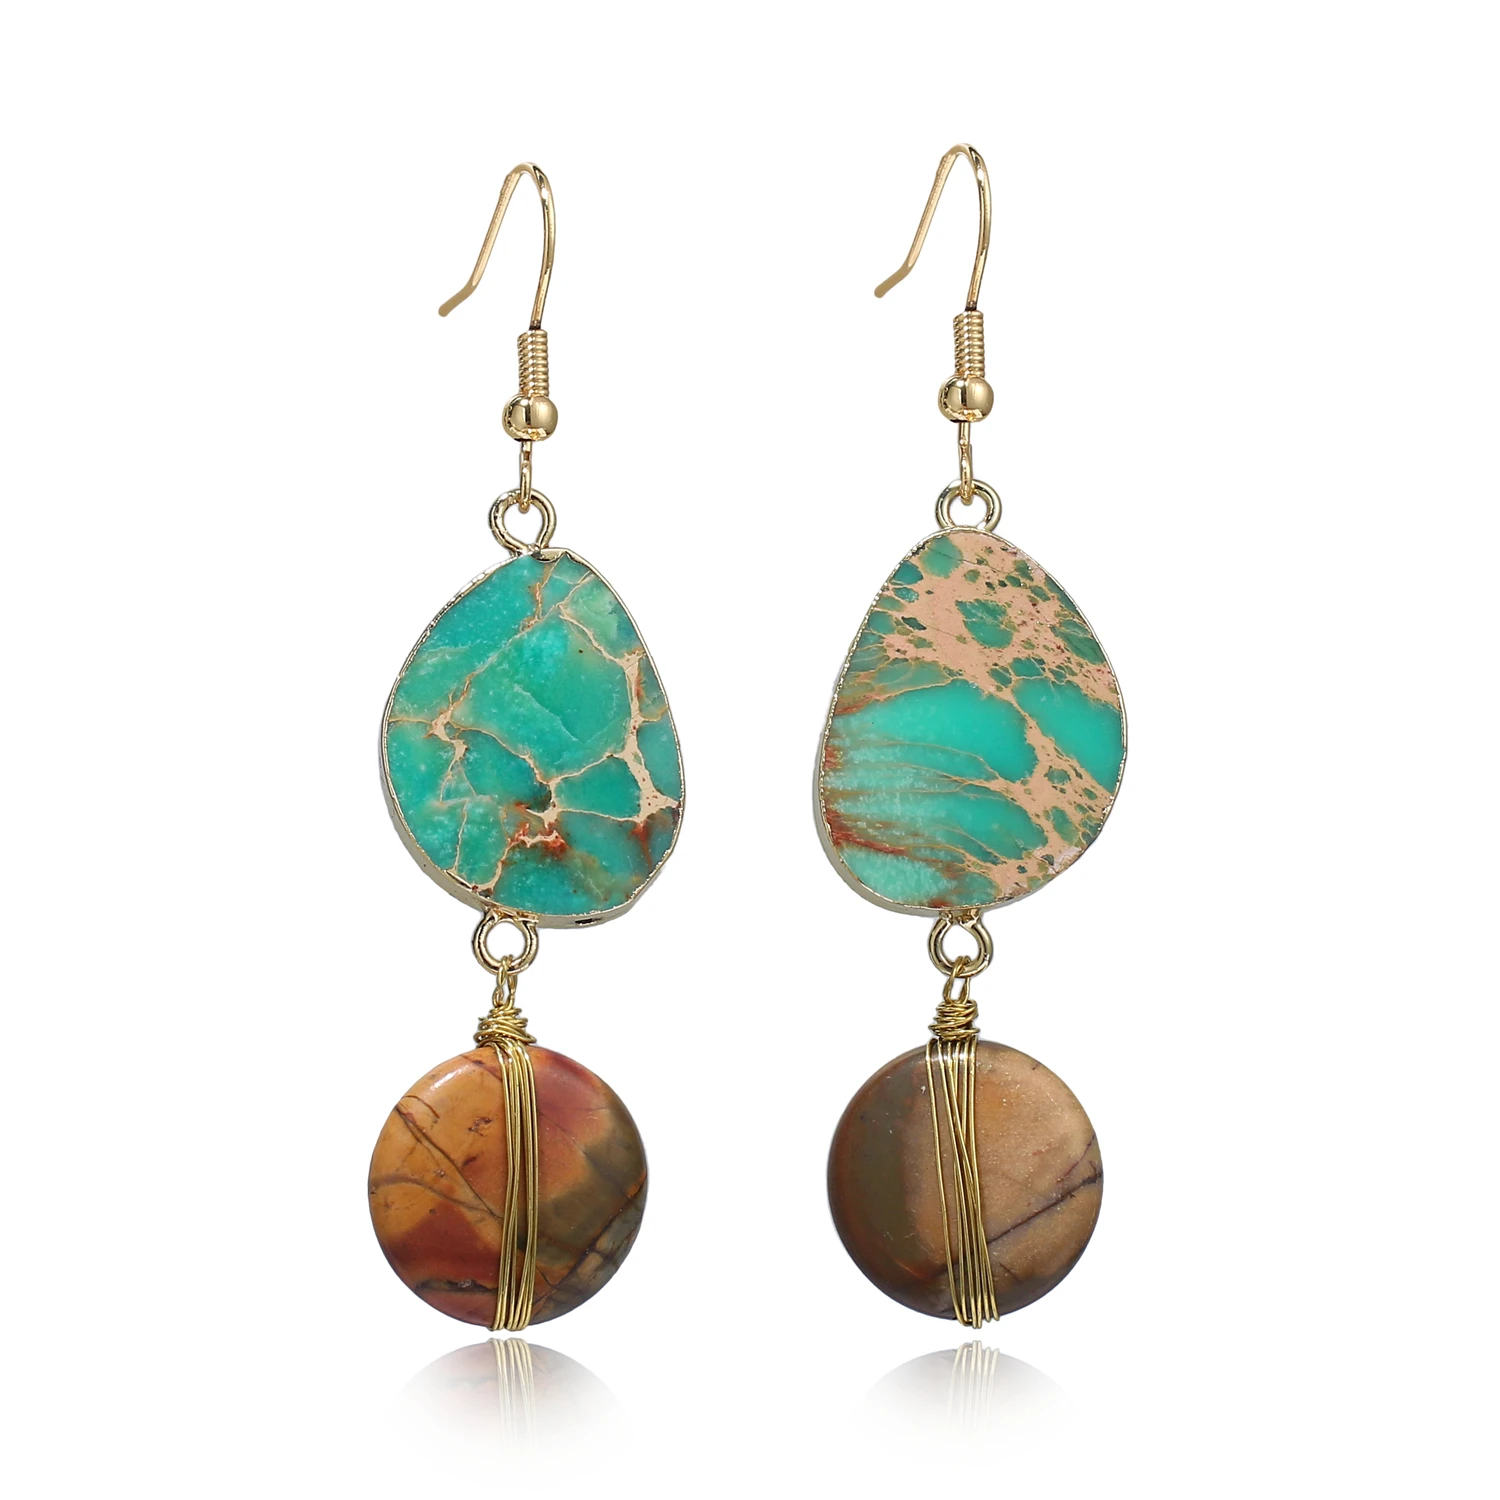 

Fashion DIY handmade 14k gold filled wire wrapped natural loose gemstone sea sediment imperial jasper stone earrings, Picture shows